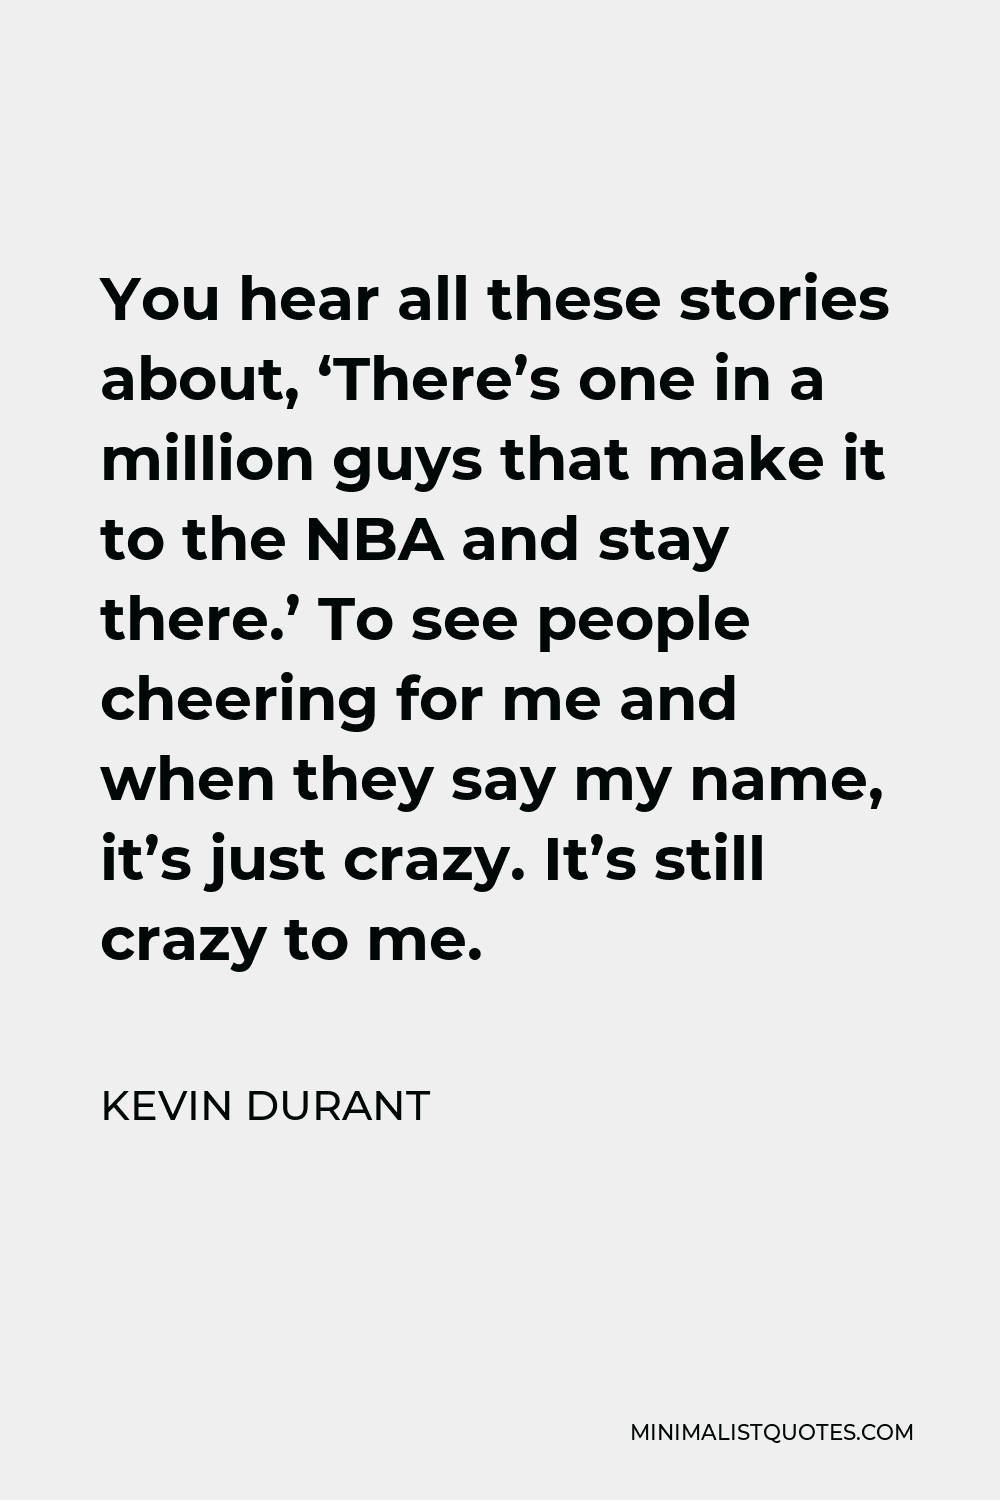 Kevin Durant Quote - You hear all these stories about, ‘There’s one in a million guys that make it to the NBA and stay there.’ To see people cheering for me and when they say my name, it’s just crazy. It’s still crazy to me.